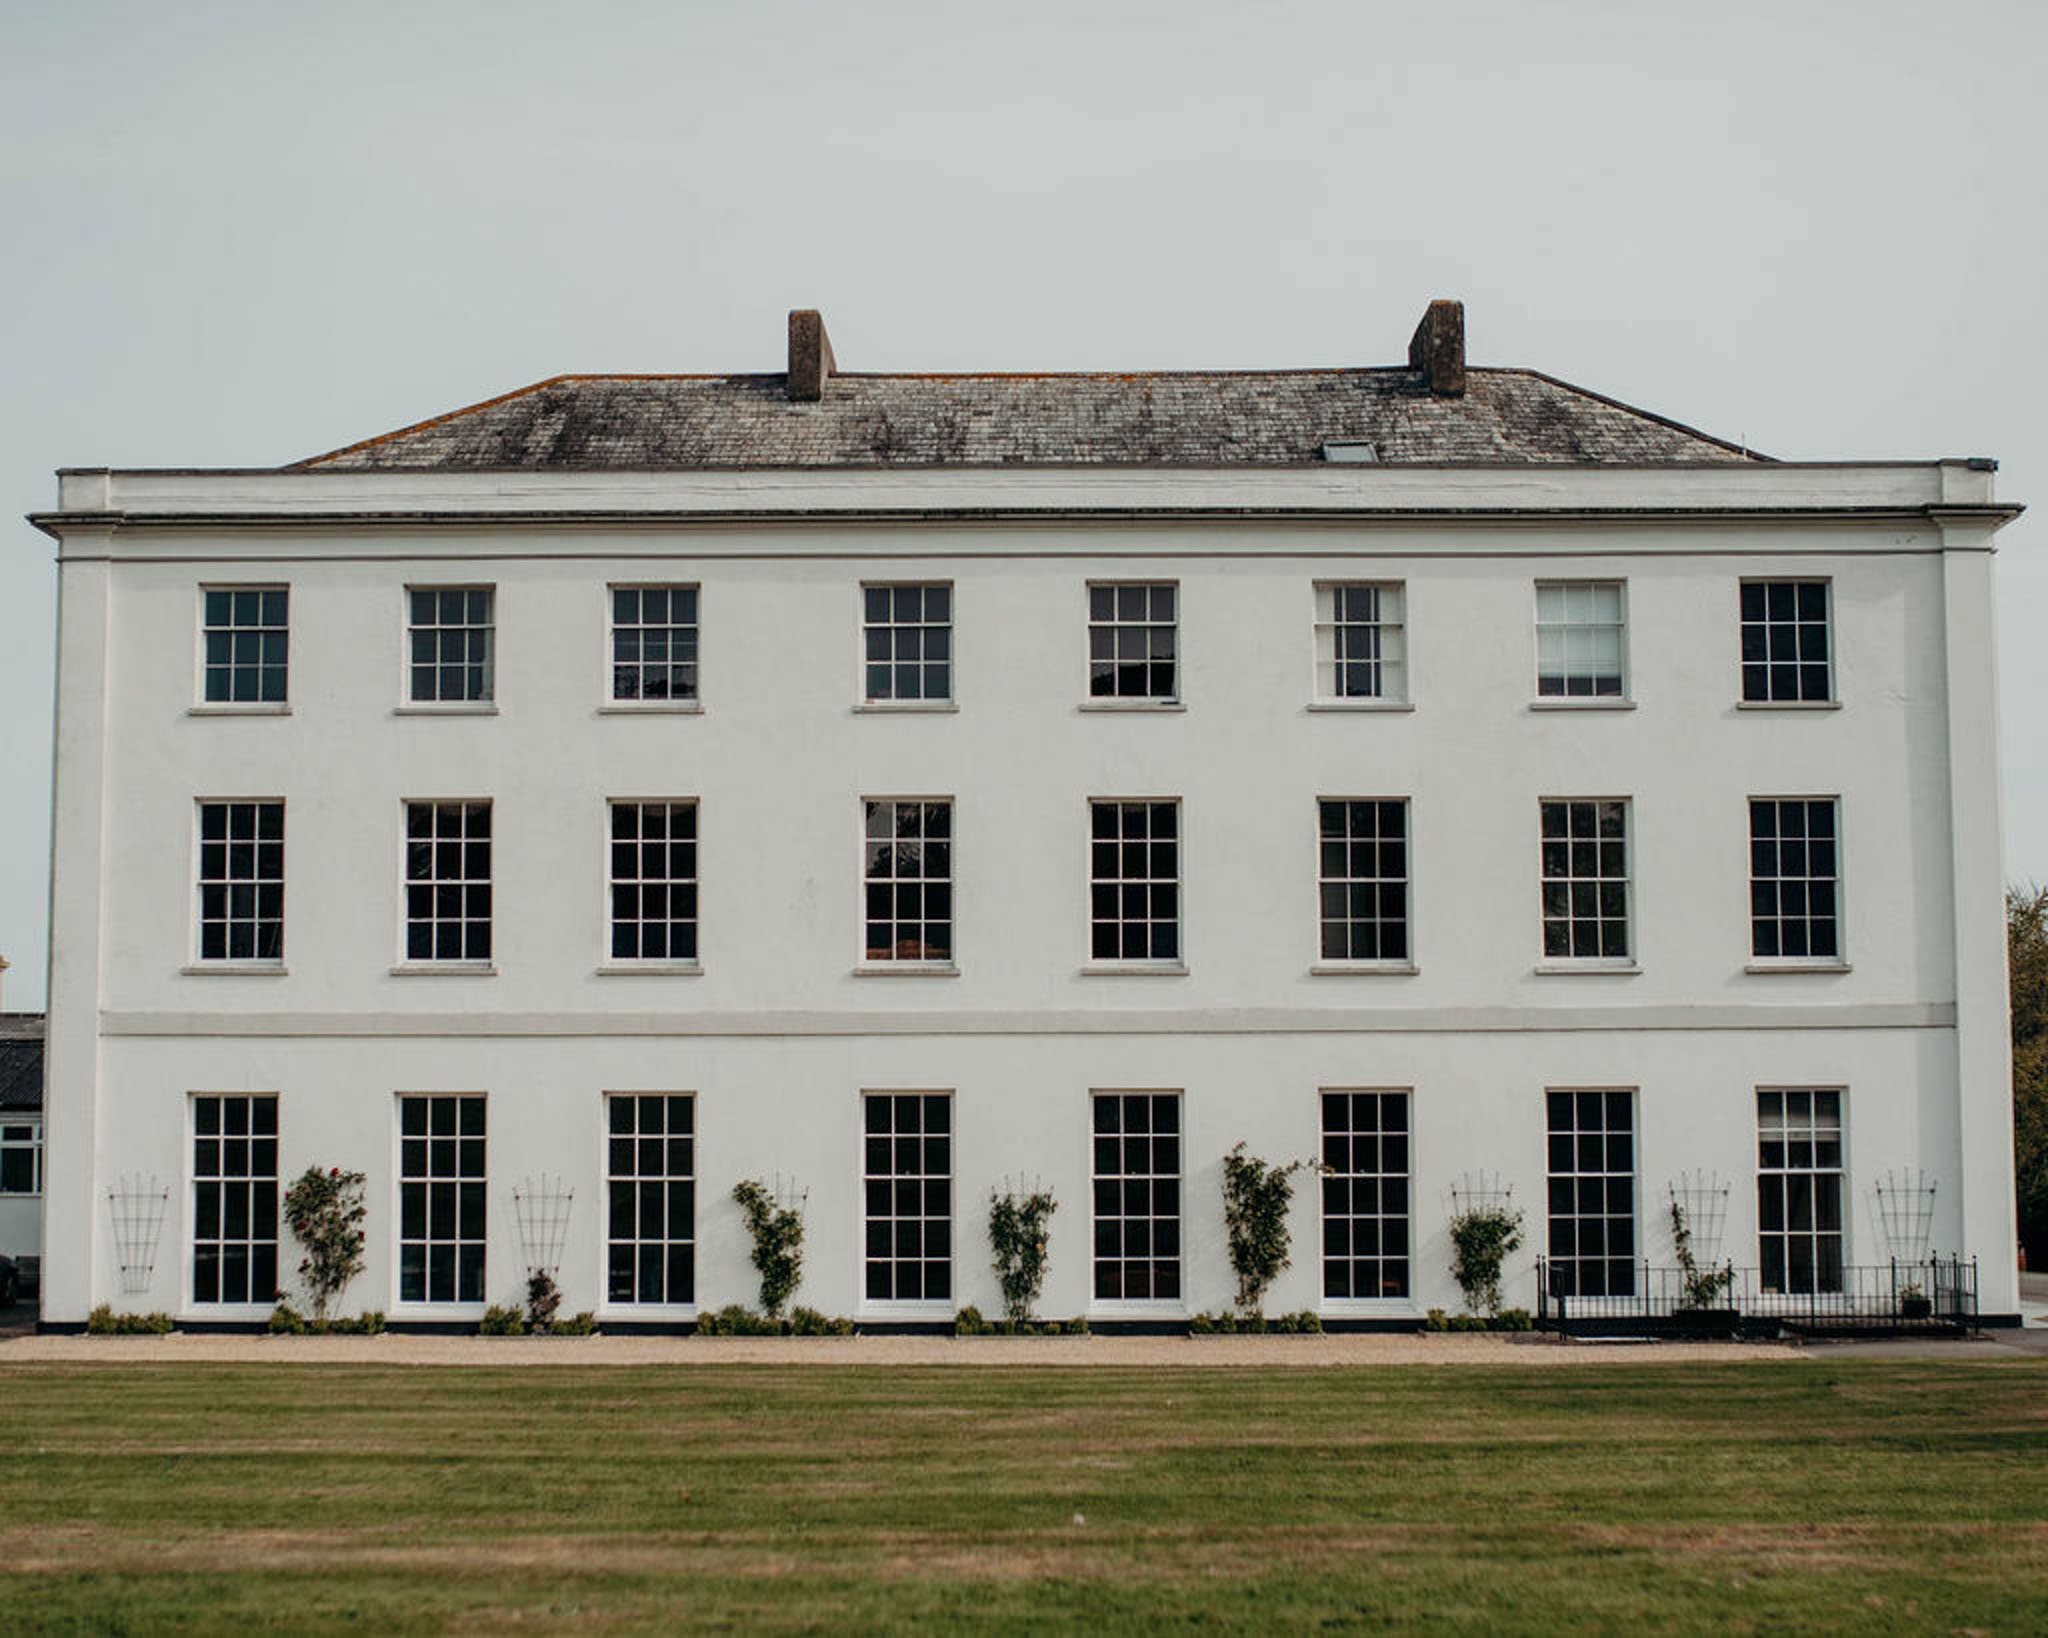 Photograph of the back of the historic stately home and North Devon wedding venue Moreton House.